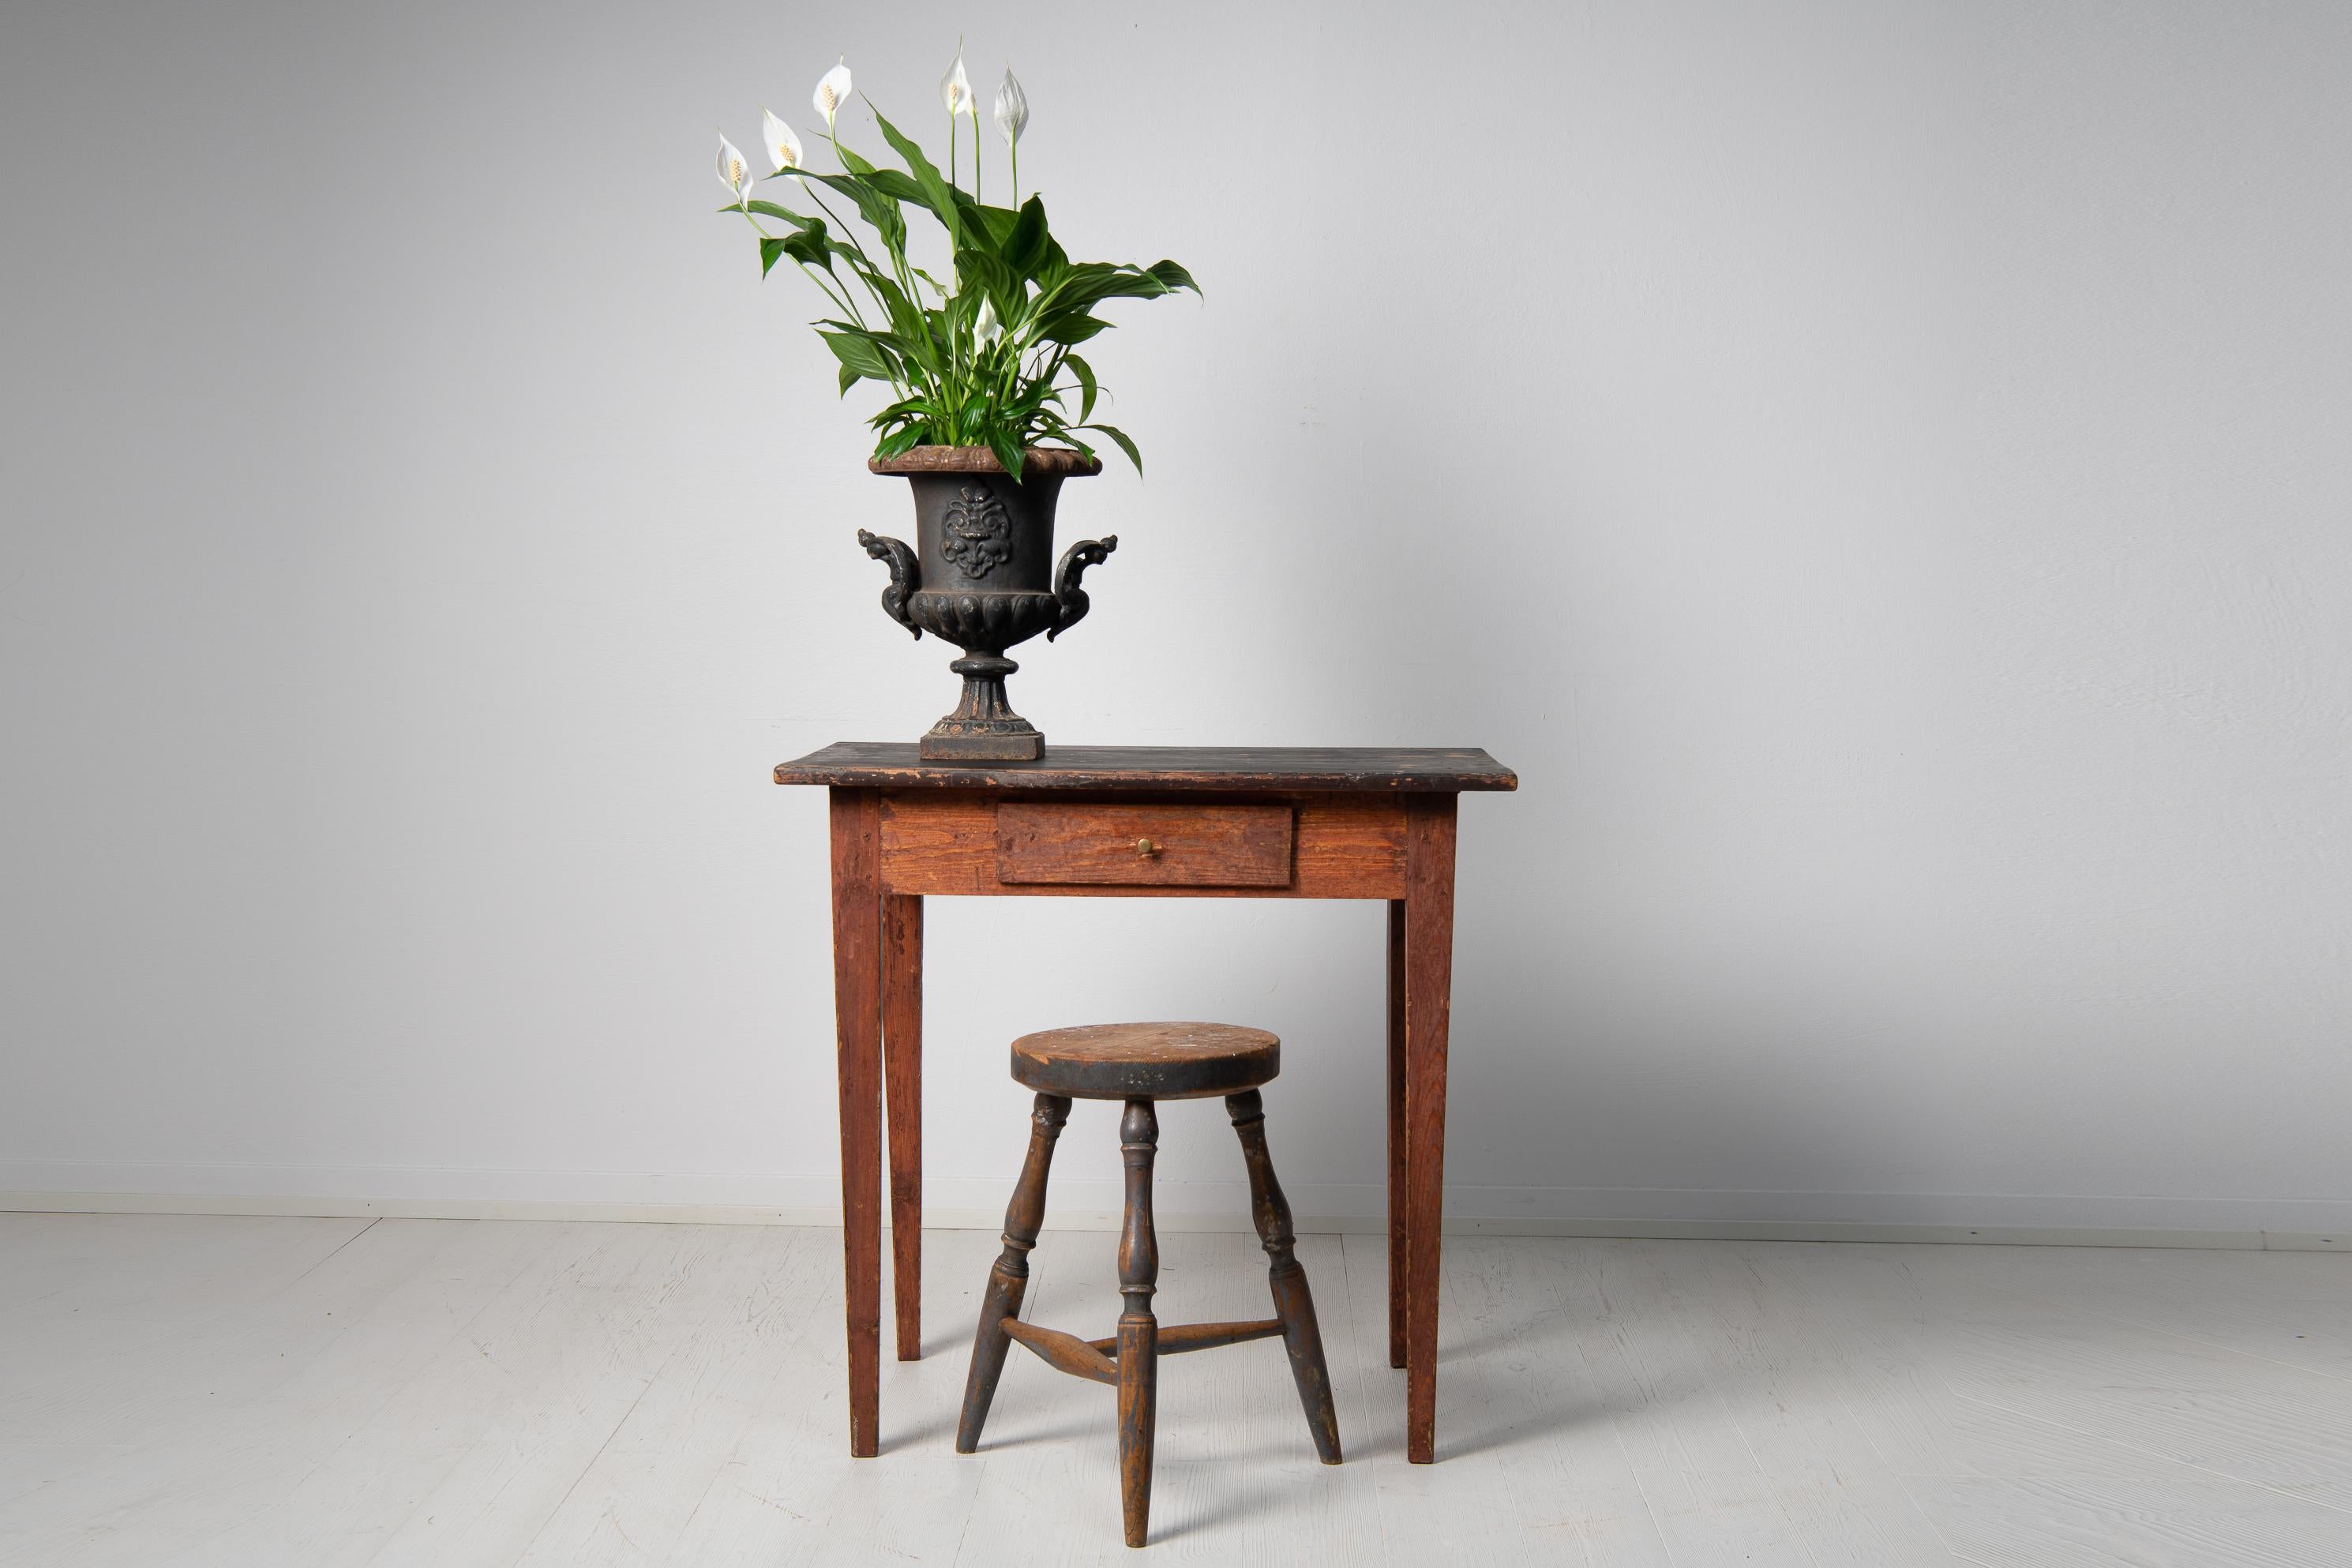 Folk art side table in gustavian style from Sweden, with tapered legs and a drawer. The table is painted pine with traces of the original paint and has the patinated surface only time can make. The drawer has the customary ink stains. Height from